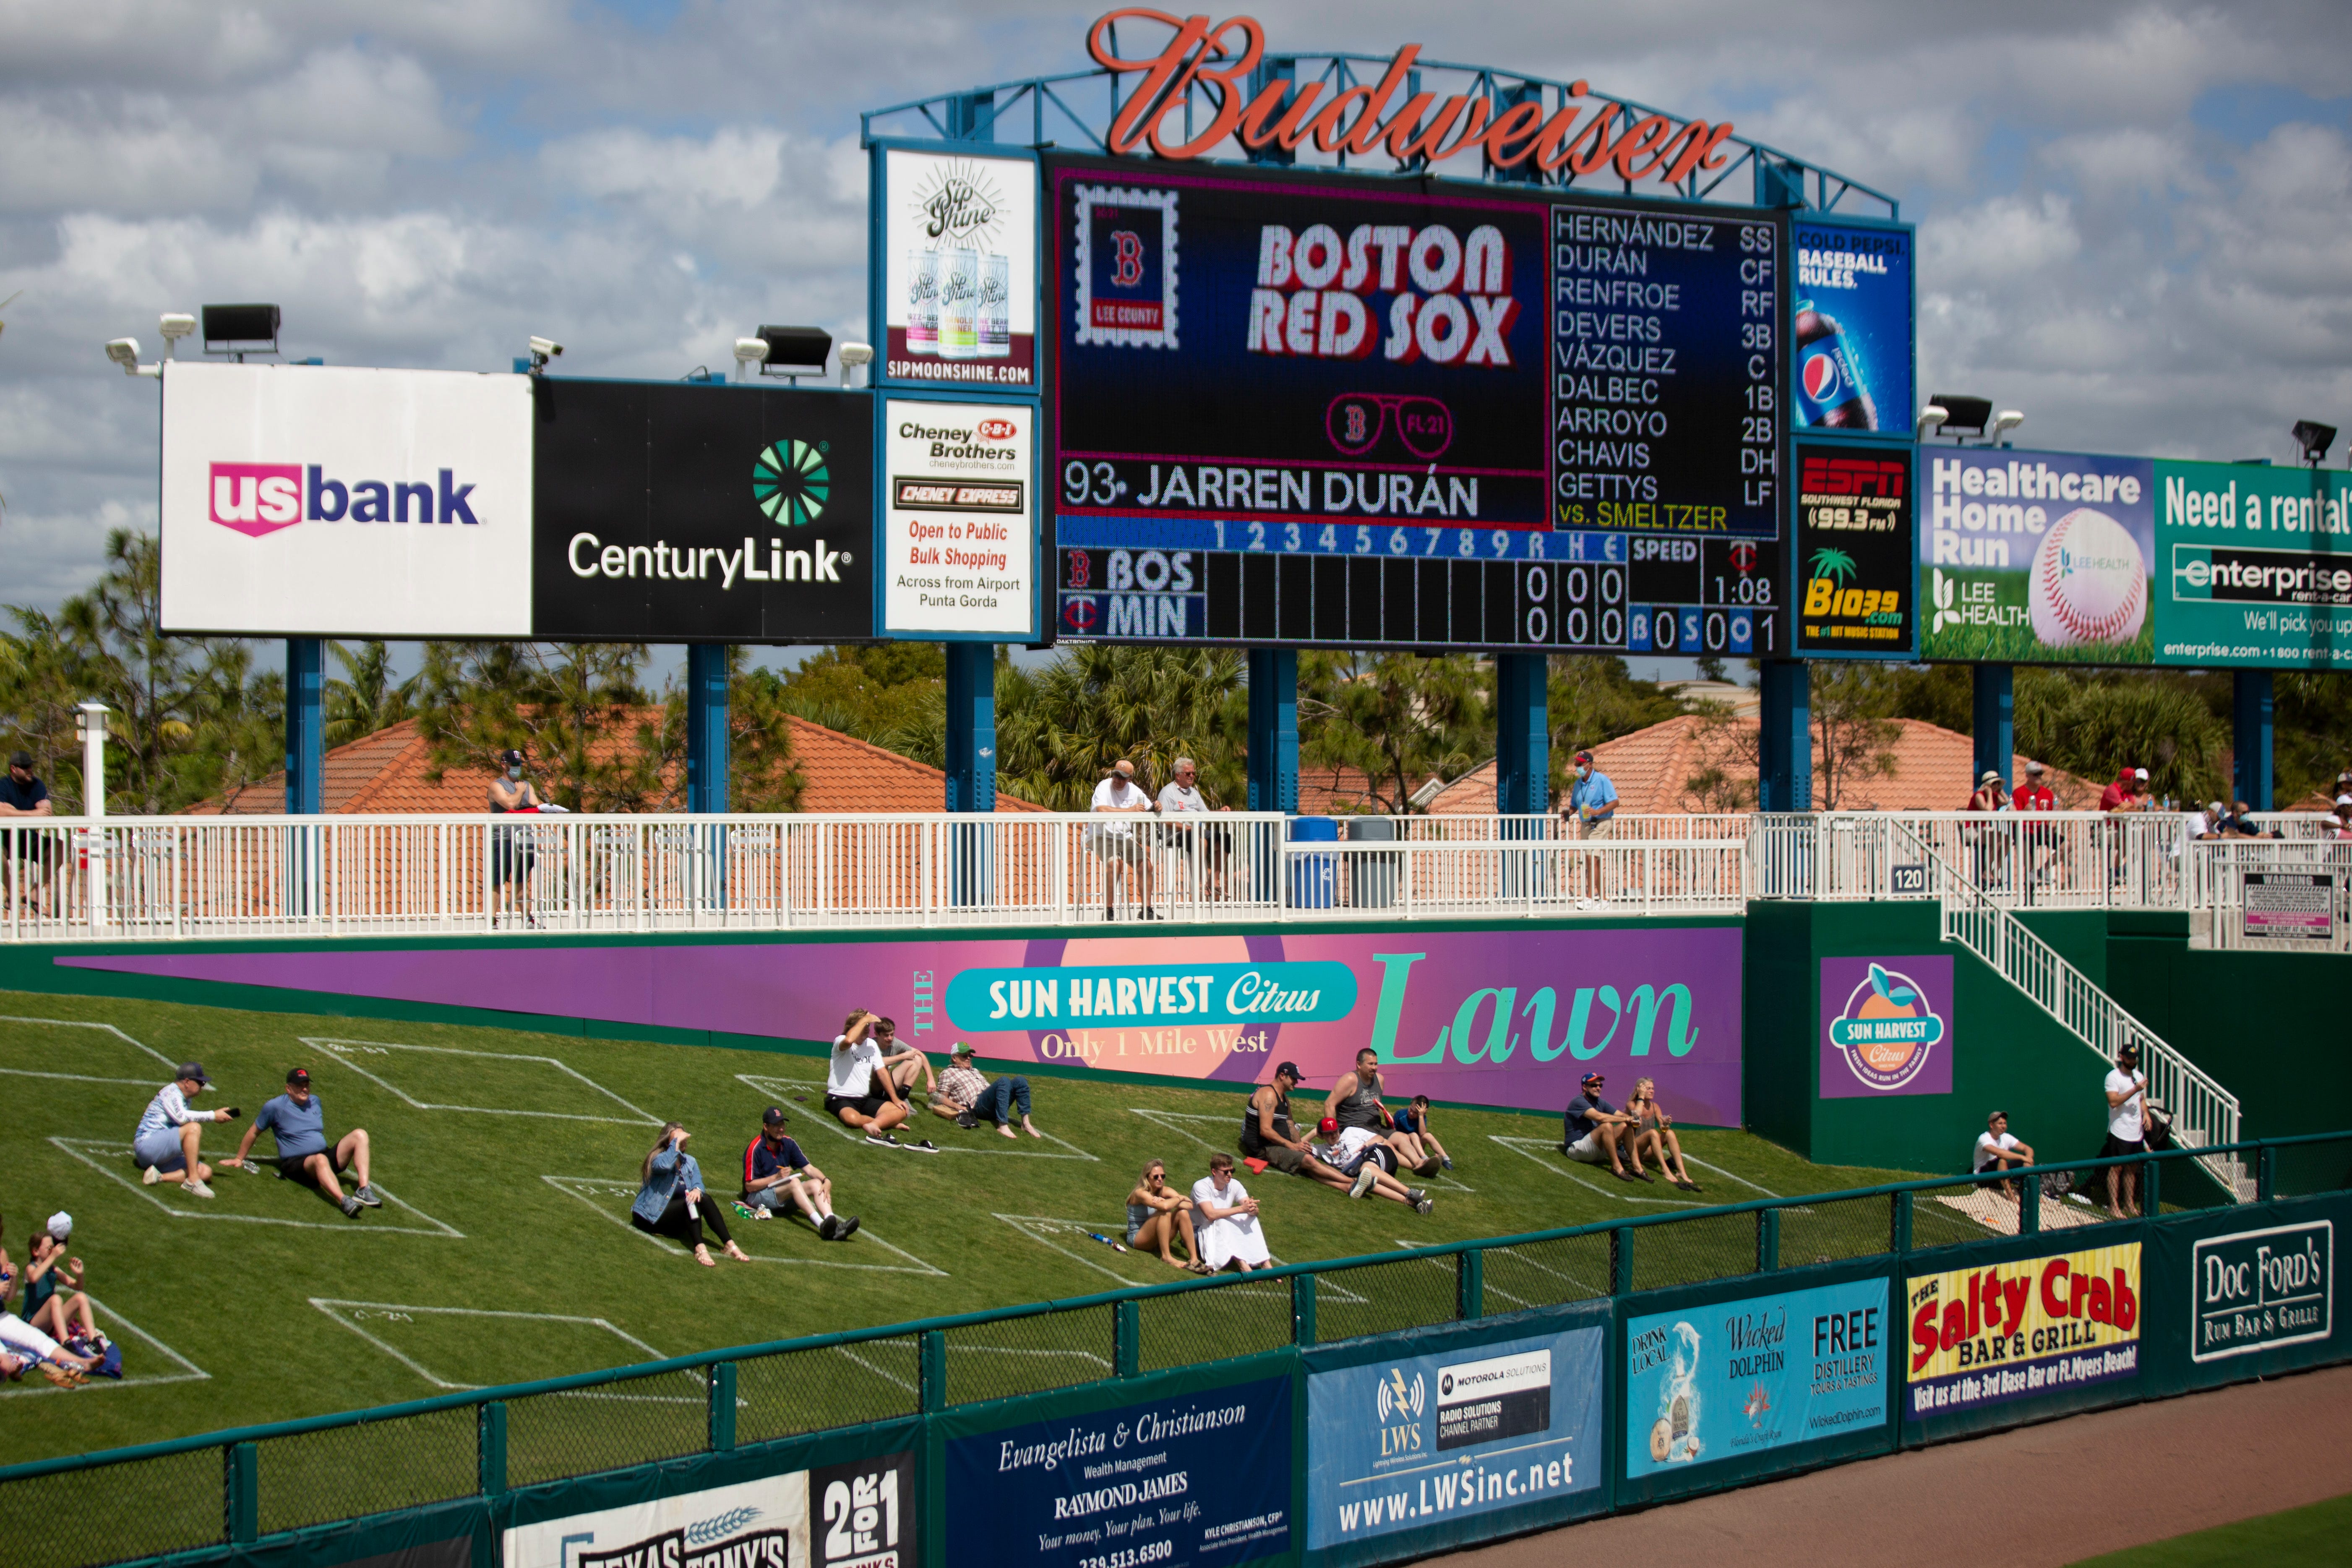 Minnesota Twins' spring training now back to being called Lee County Sports Complex